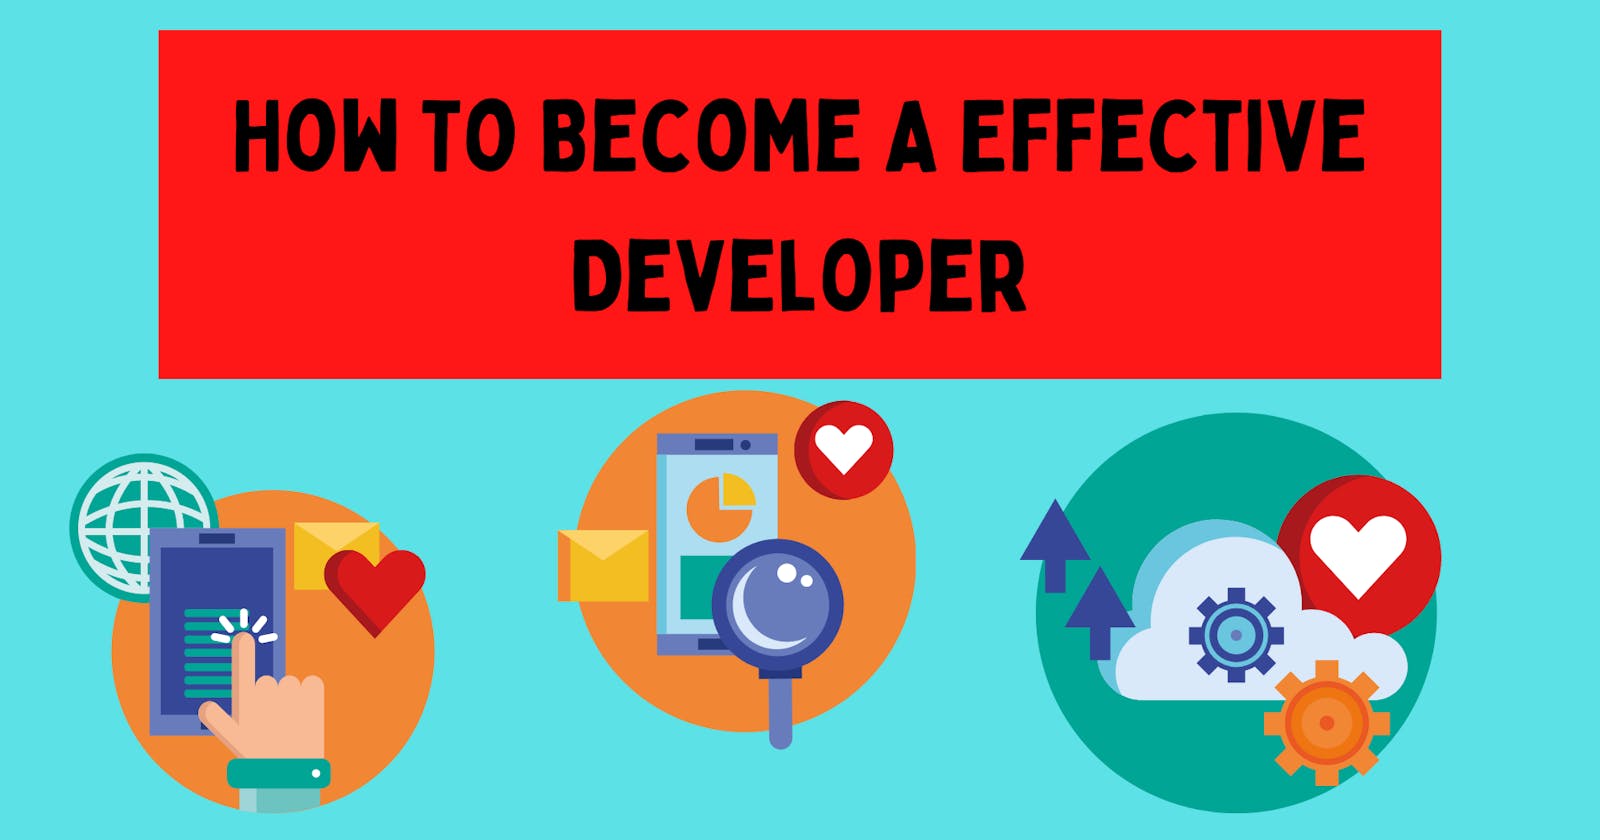 How To Become A Effective Developer